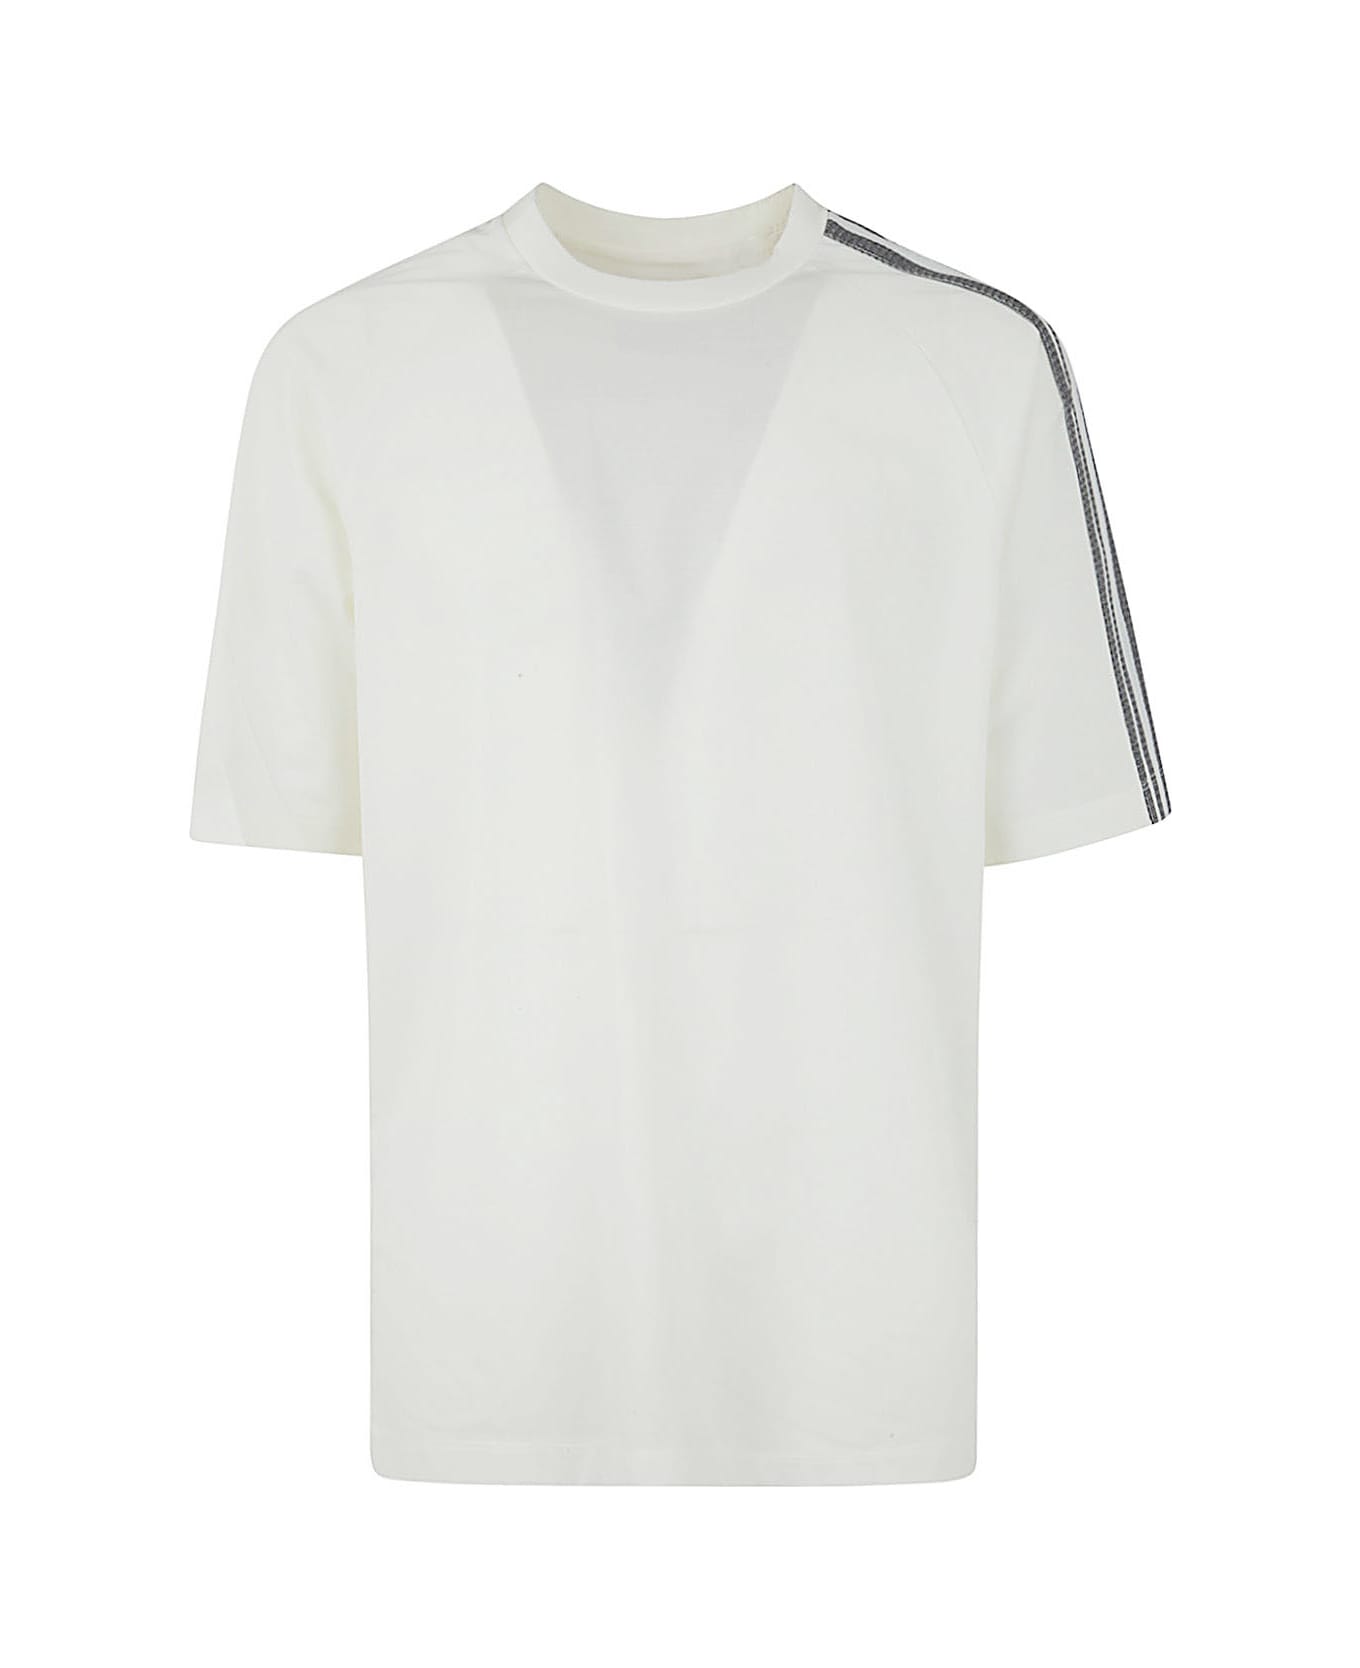 Y-3 3s Short Sleeve Tee - Off White